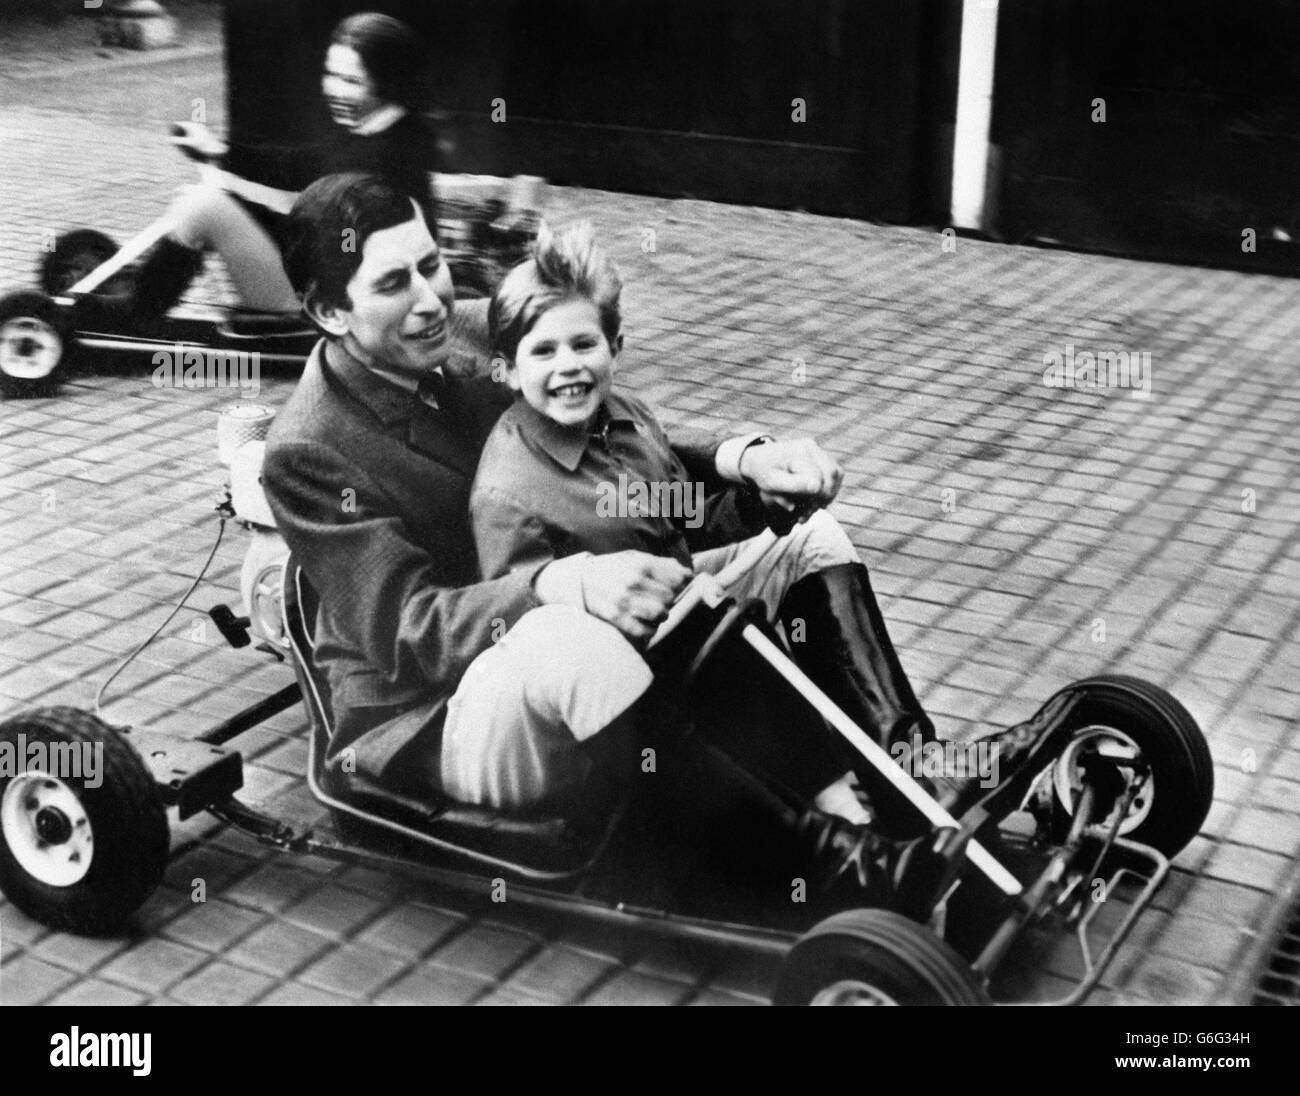 Prince Charles gives his five-year-old brother Prince Edward a ride on a go-kart in the grounds of Windsor Castle. Princess Anne is driving her own kart in the background. Stock Photo